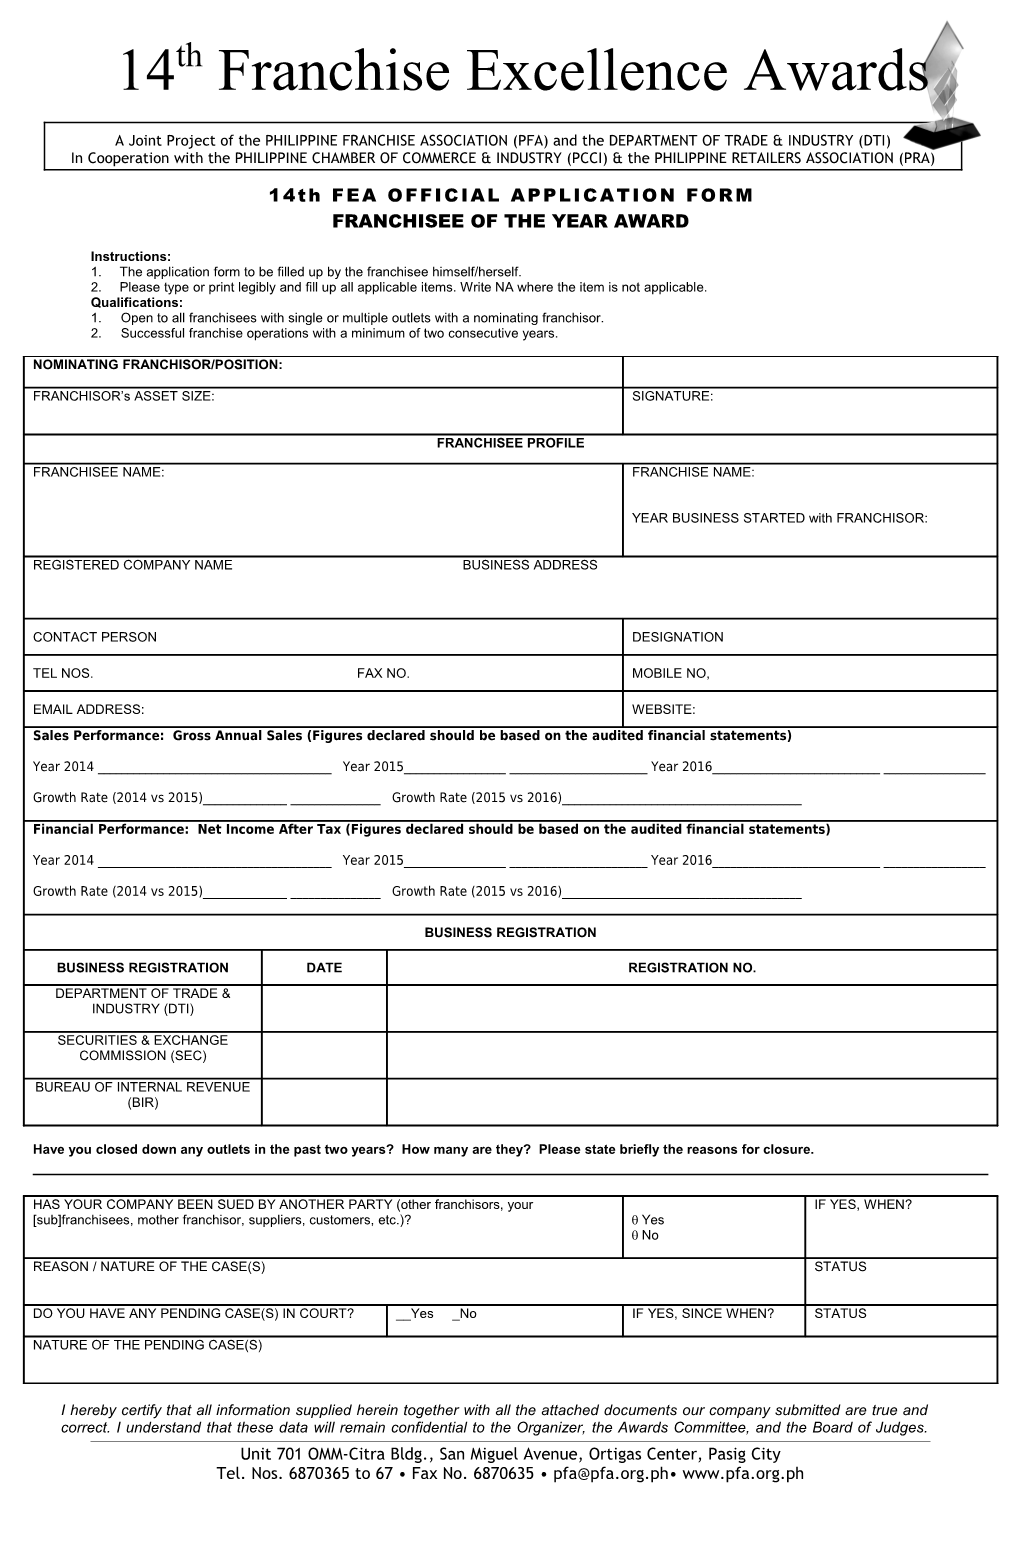 14Th FEA OFFICIAL APPLICATION FORM